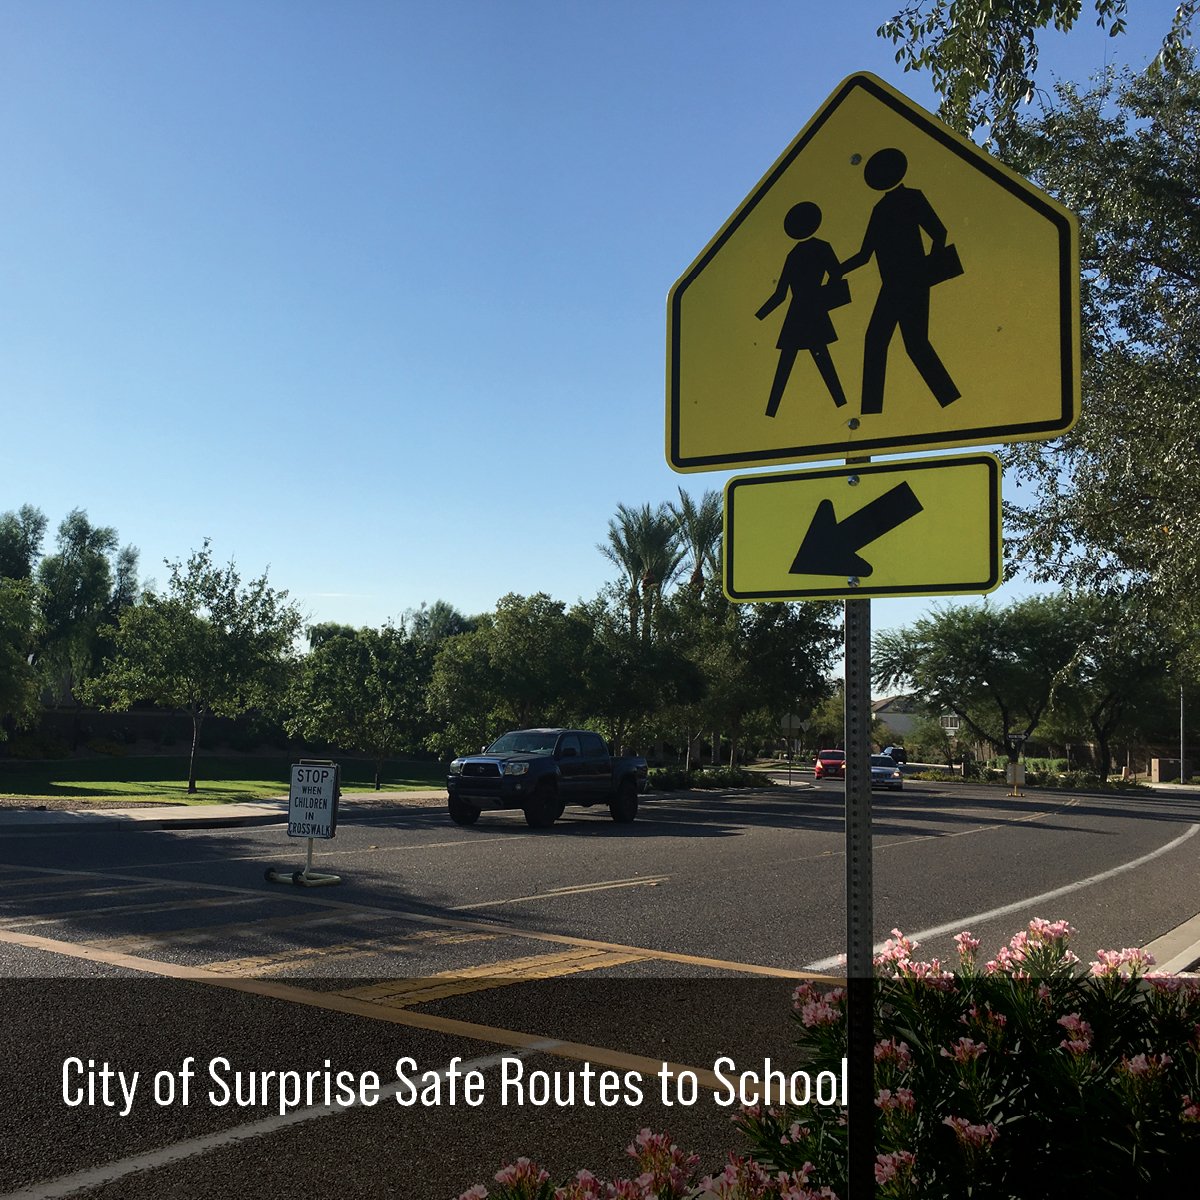 City of Surprise Safe Routes to School 4x4.jpg